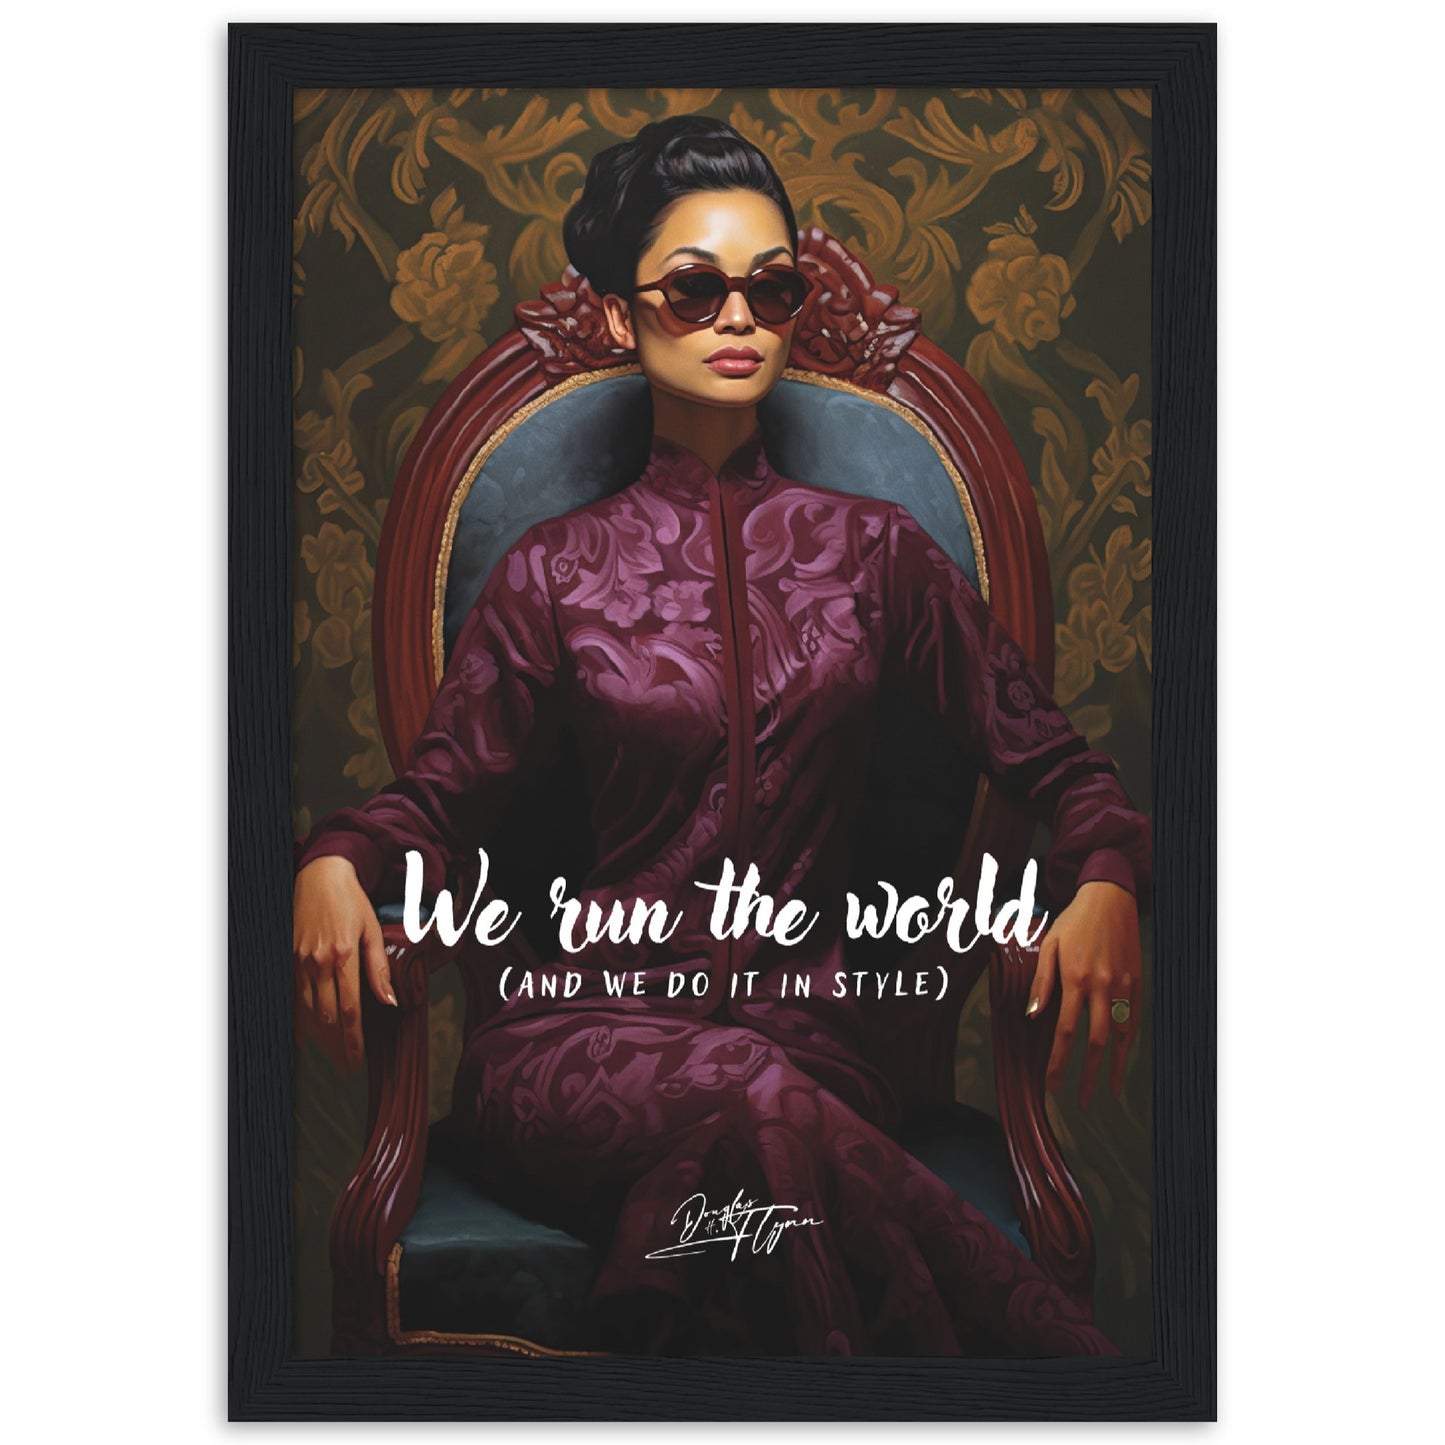 »We run the world and we do it in style«